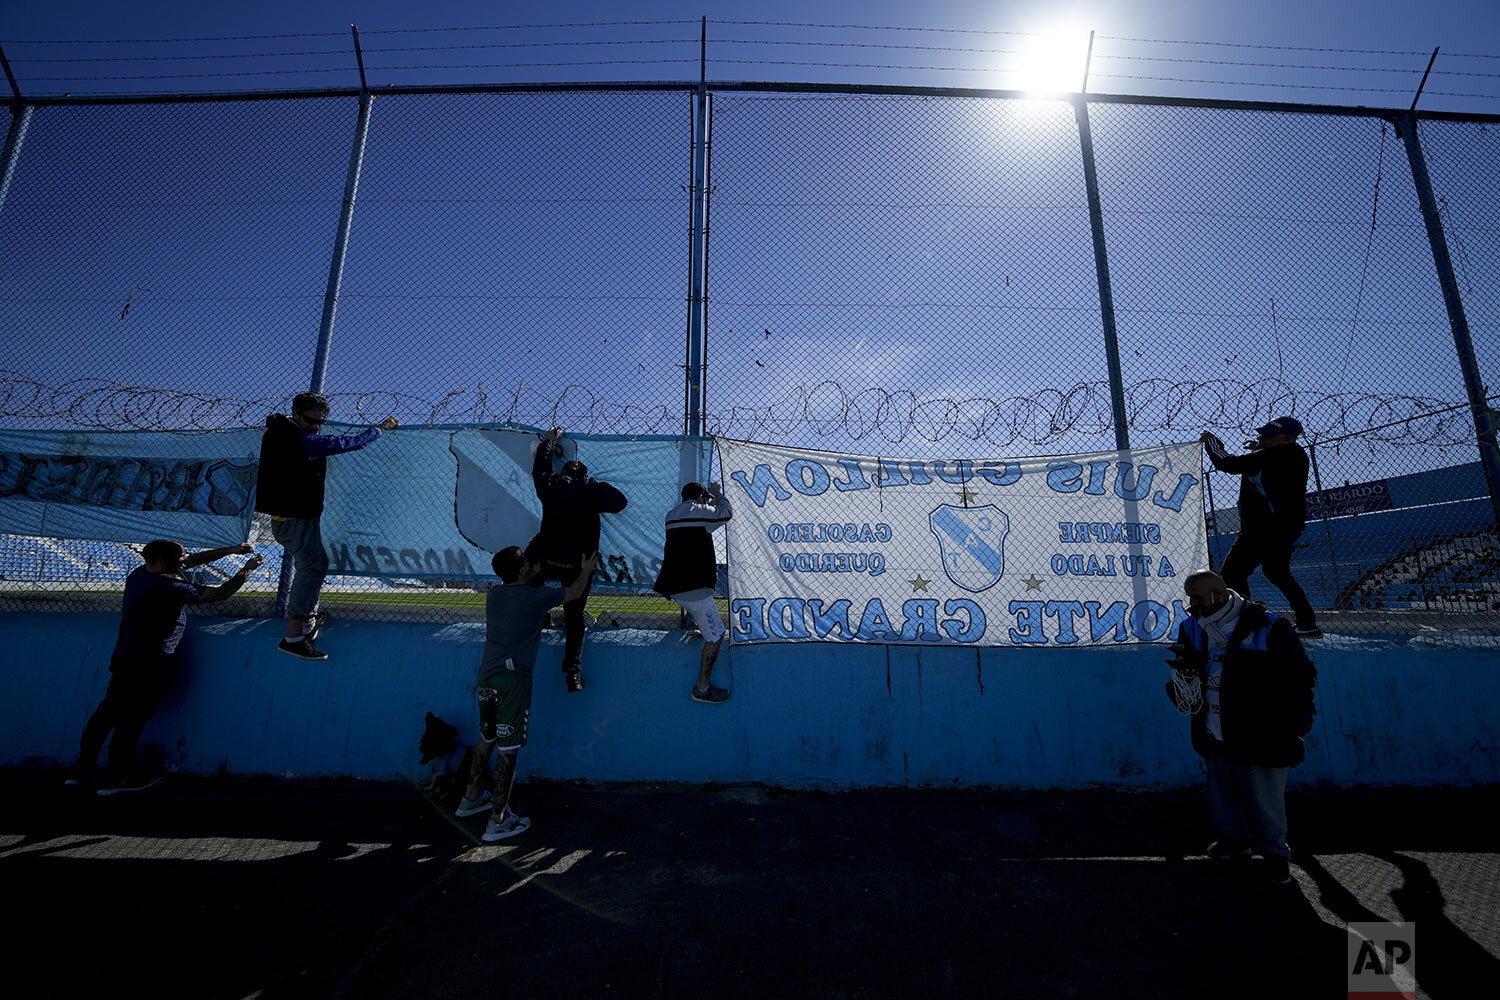  Temperley soccer fans hang banners before their team's match against Club Atletico Alvarado at the Alfredo Beranger Stadium, devoid of fans due to COVID-19 restrictions in Lomas de Zamora, Argentina, Aug. 27, 2021. (AP Photo/Natacha Pisarenko) 